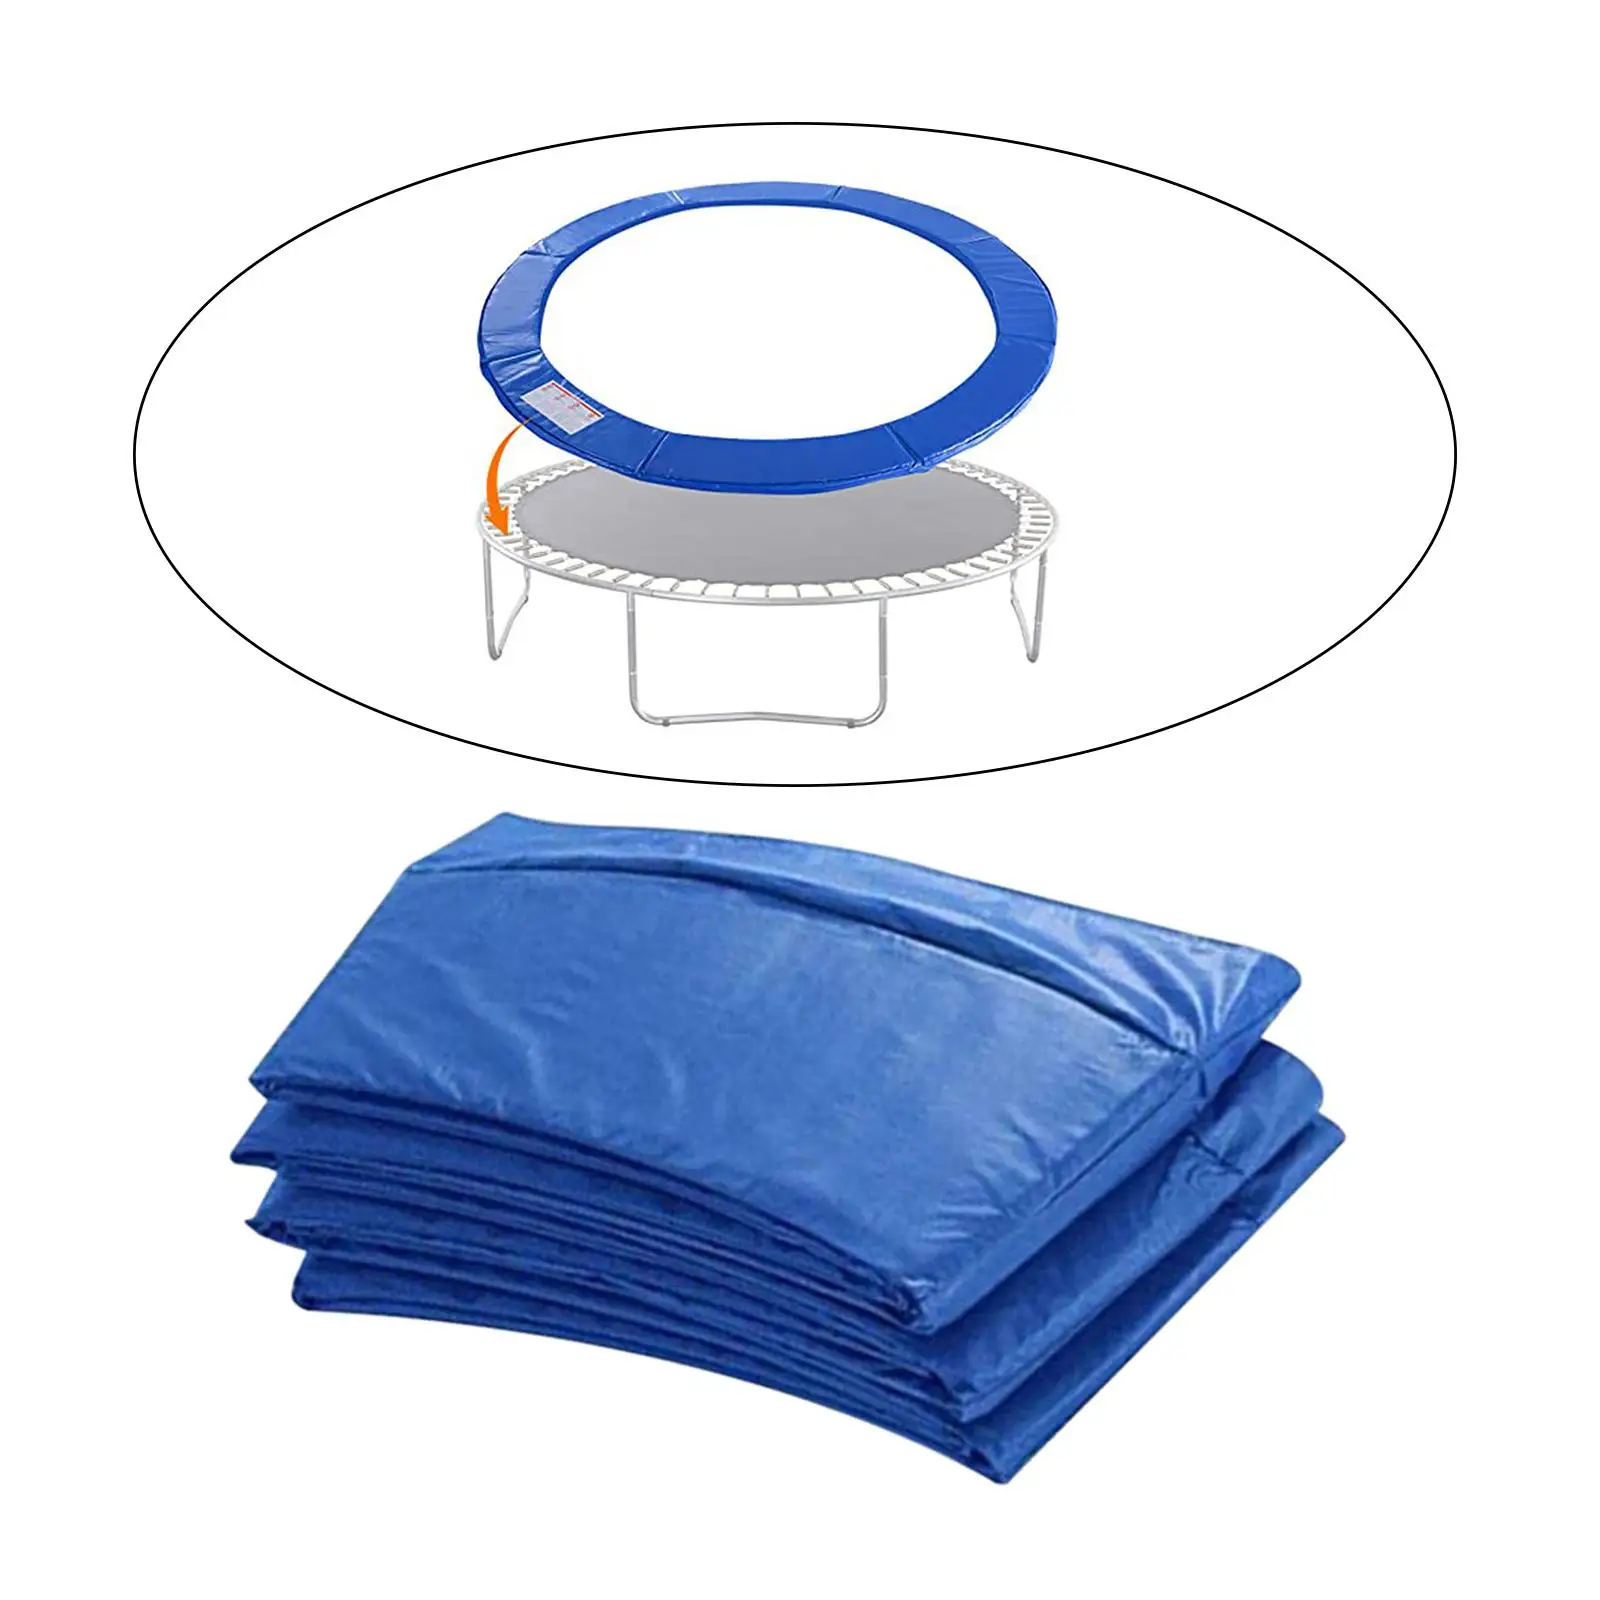 Trampoline Pad Easy Install Mat Safety Padding Protection Spring Side Cover